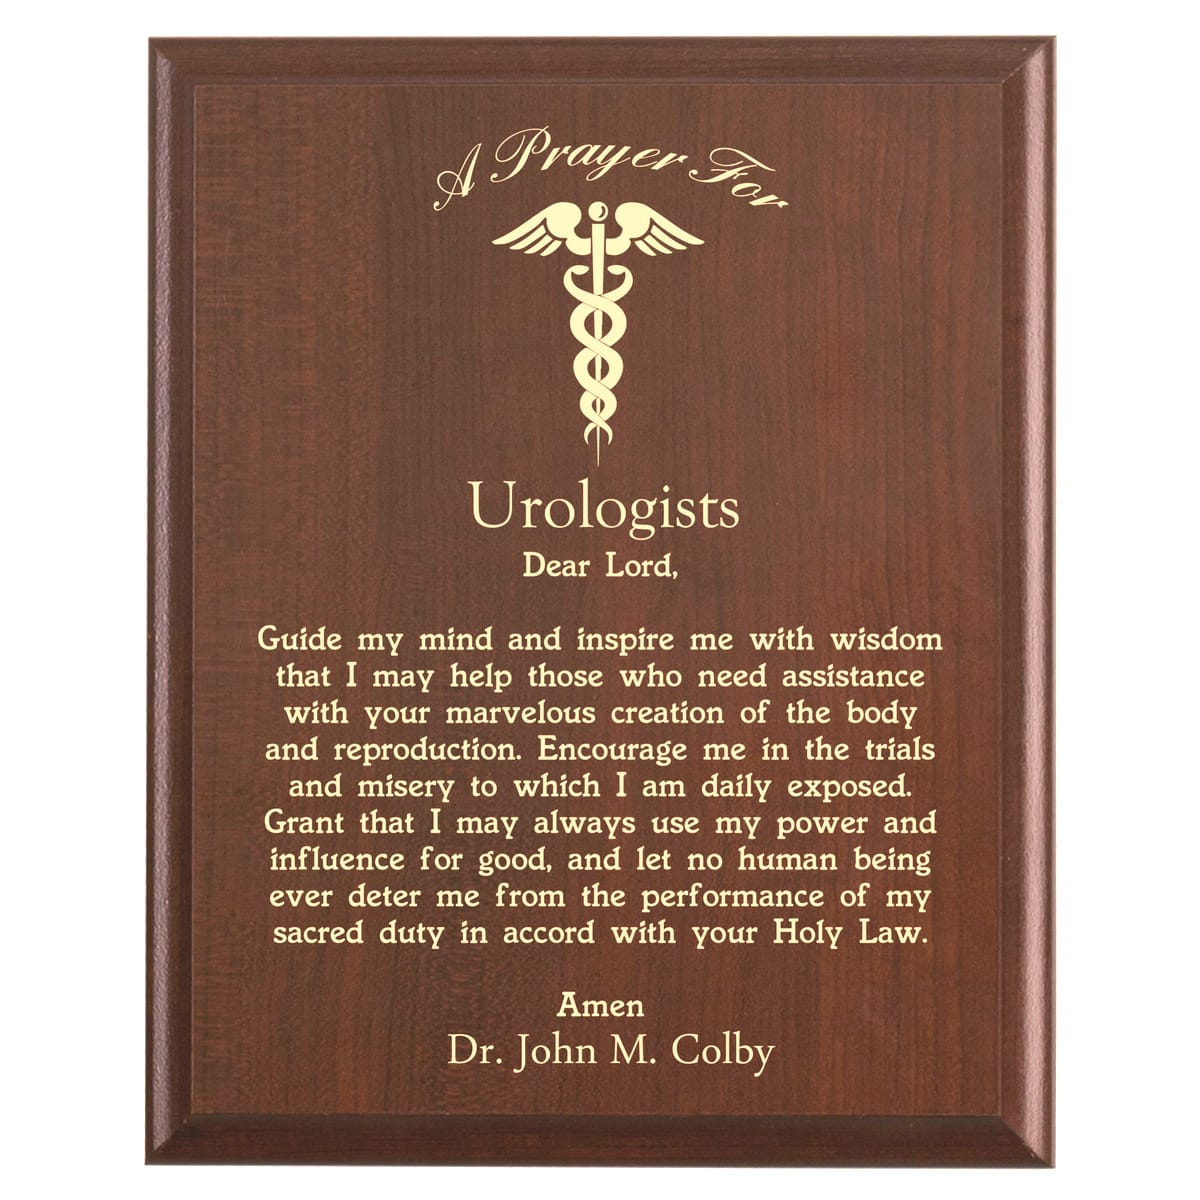 Plaque photo: Urologist Prayer Plaque design with free personalization. Wood style finish with customized text.